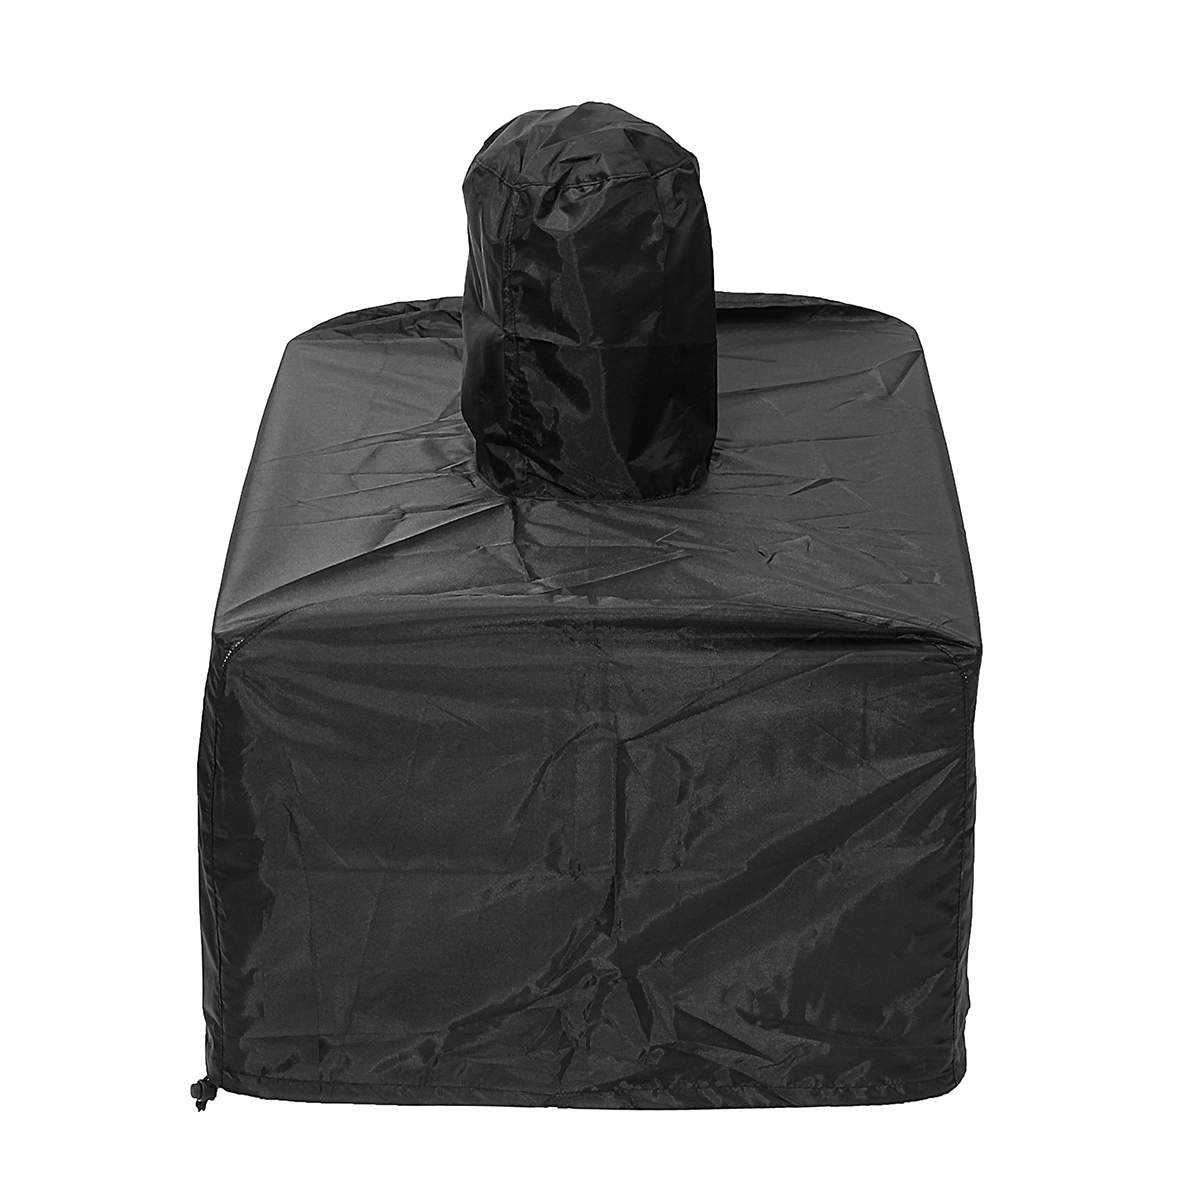 Outdoor-Pizza-Oven-Waterproof-Rain-Cover-BBQ-Charcoal-Fired-Bread-Oven-Smoker-Protector-1337984-4